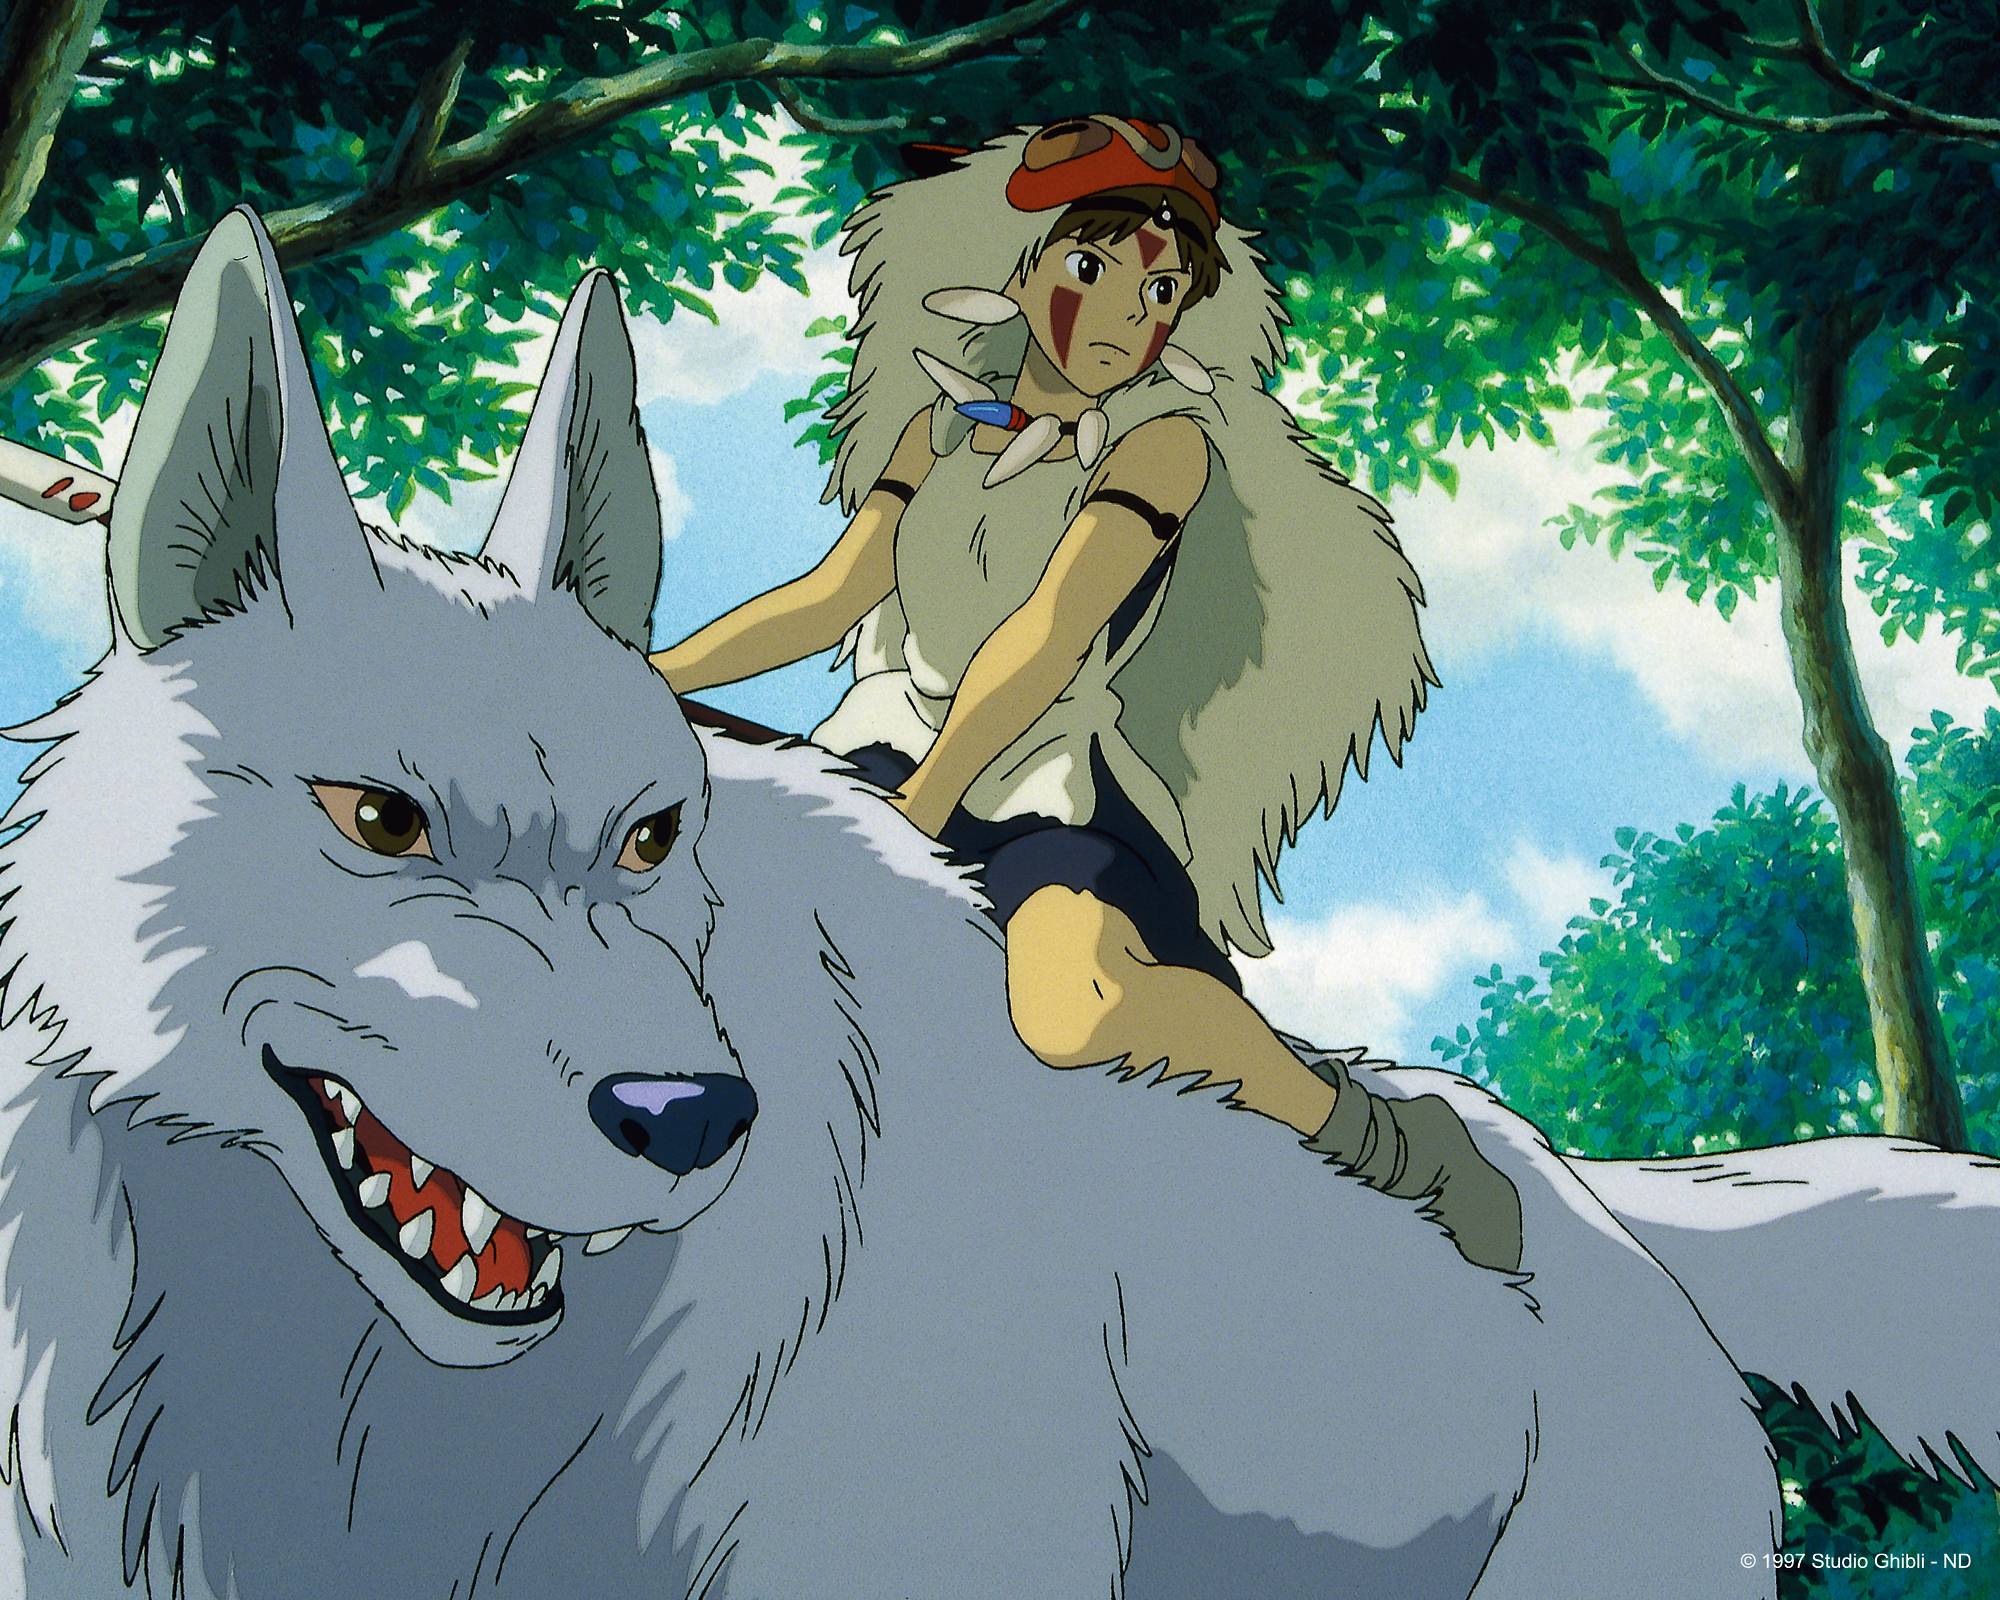 Video still from Princess Mononoke animated film featuring main character San riding a wolf